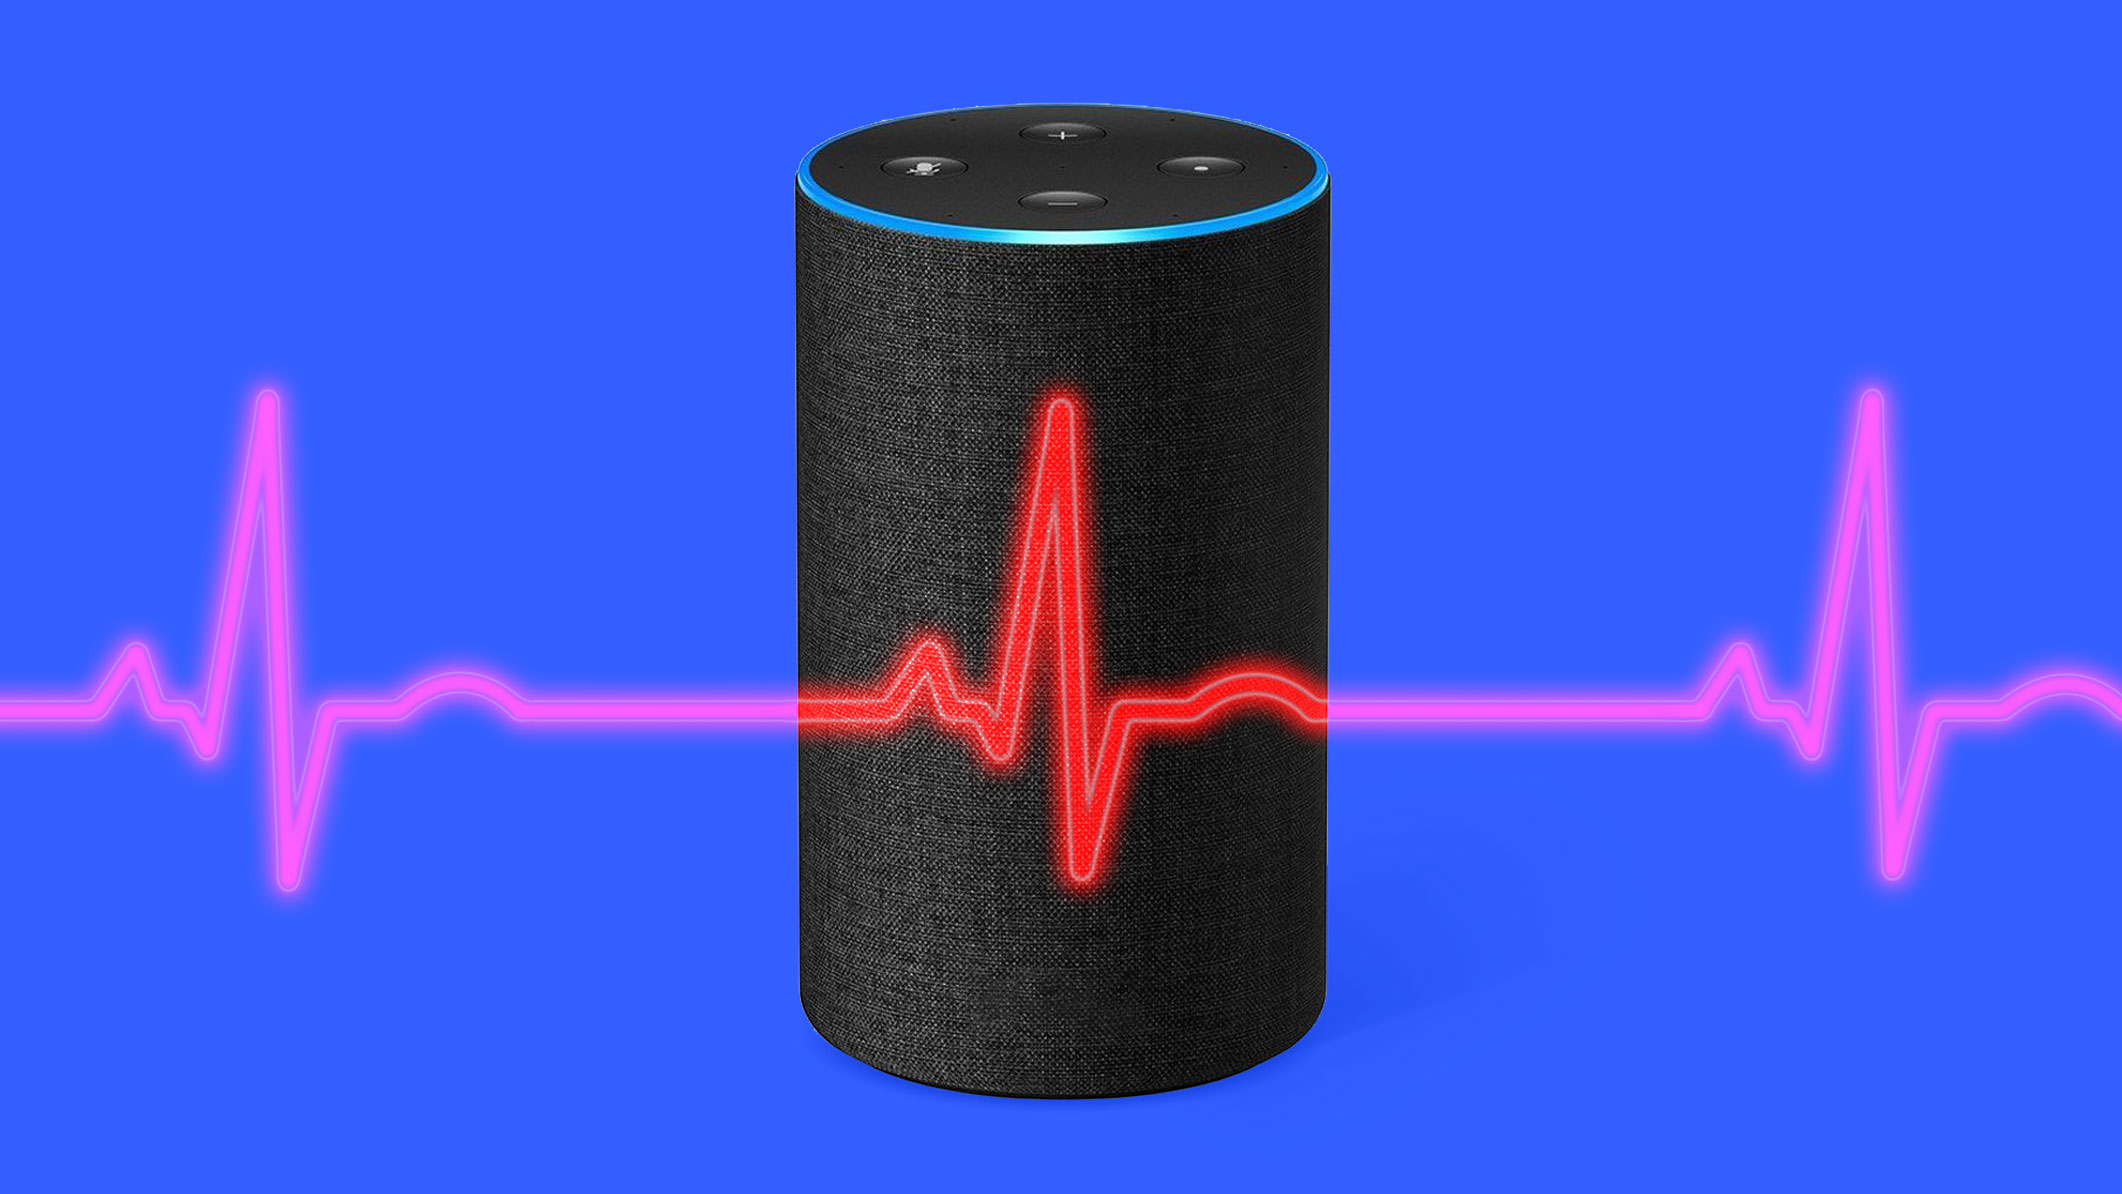 An illustration of an Amazon smart speaker and ECG waves.